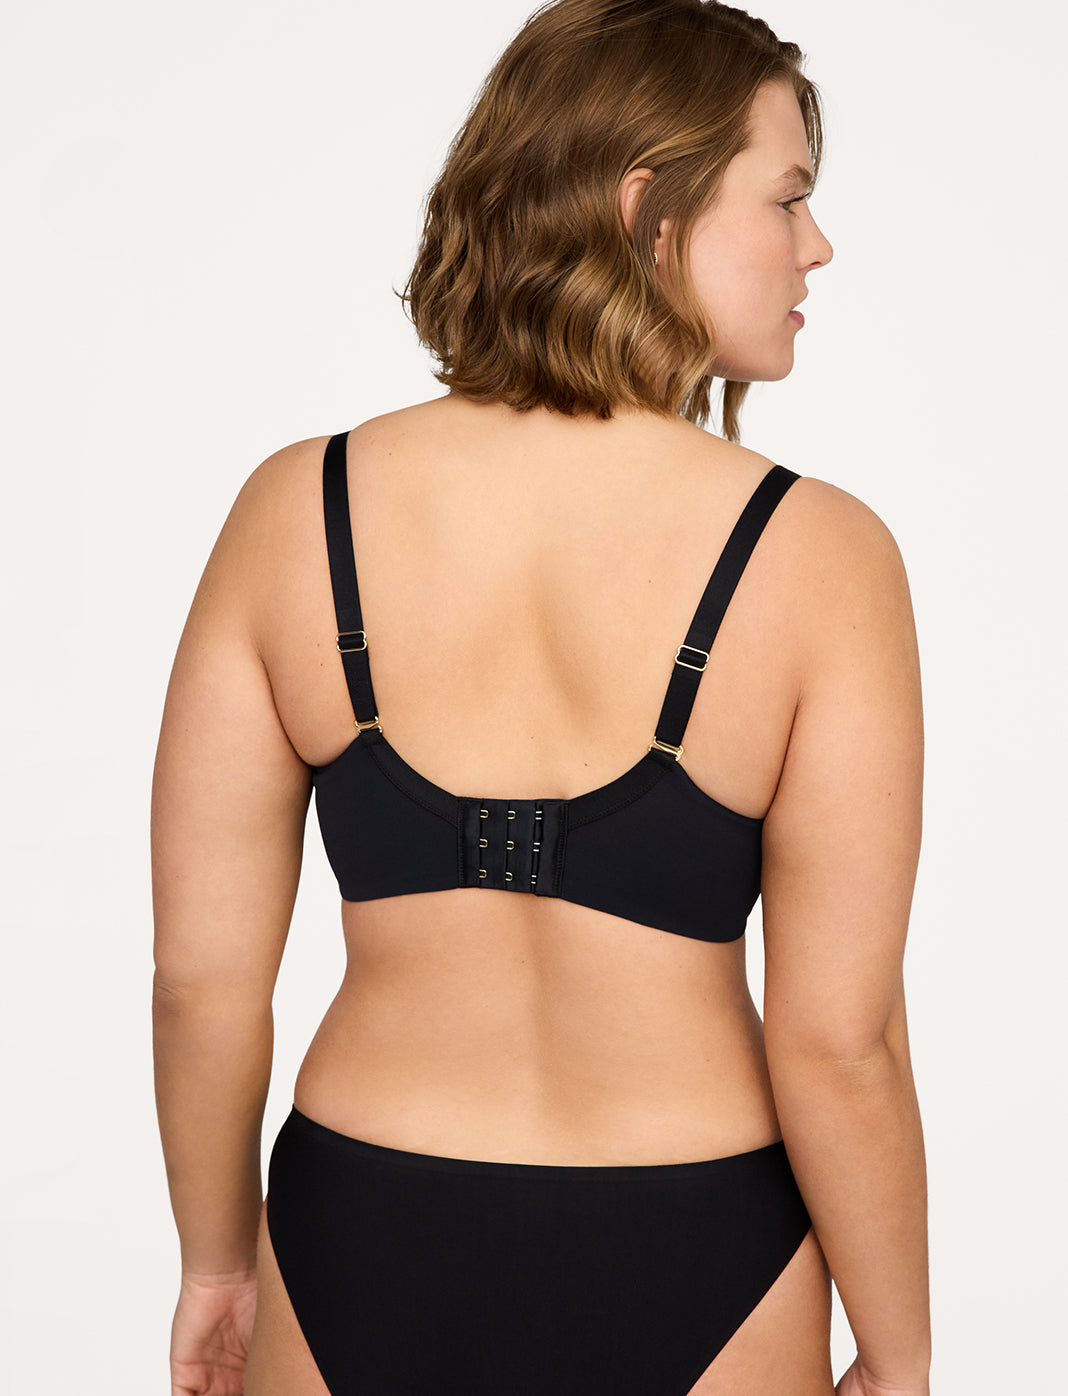 Our best-seller Minimizer Bras are back in stock. Available in 3